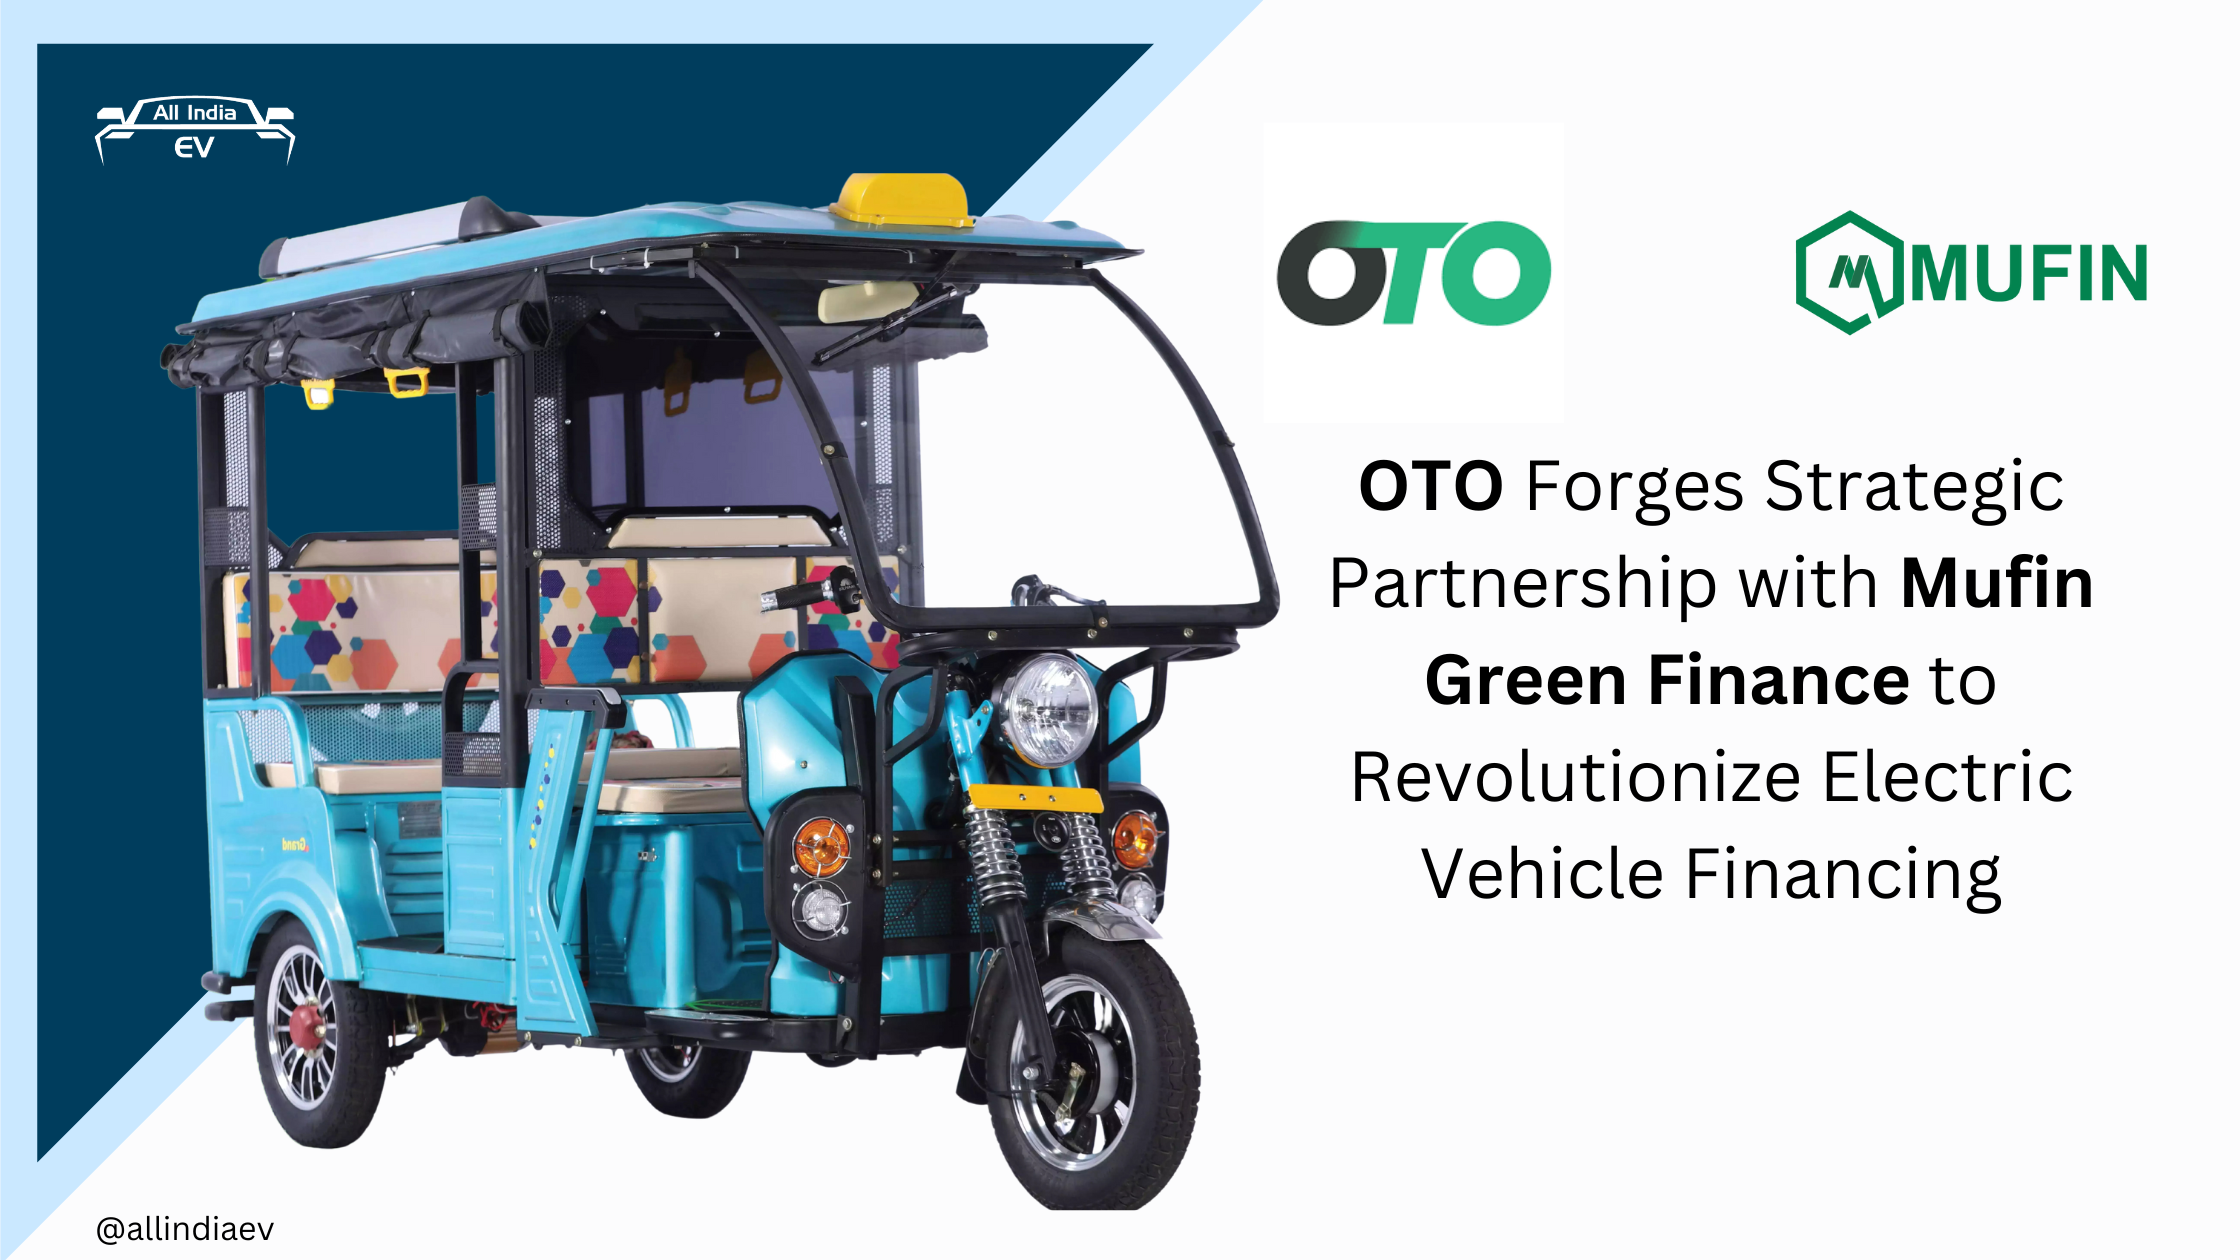 OTO Forges Strategic Partnership with Mufin Green Finance to Revolutionize Electric Vehicle Financing